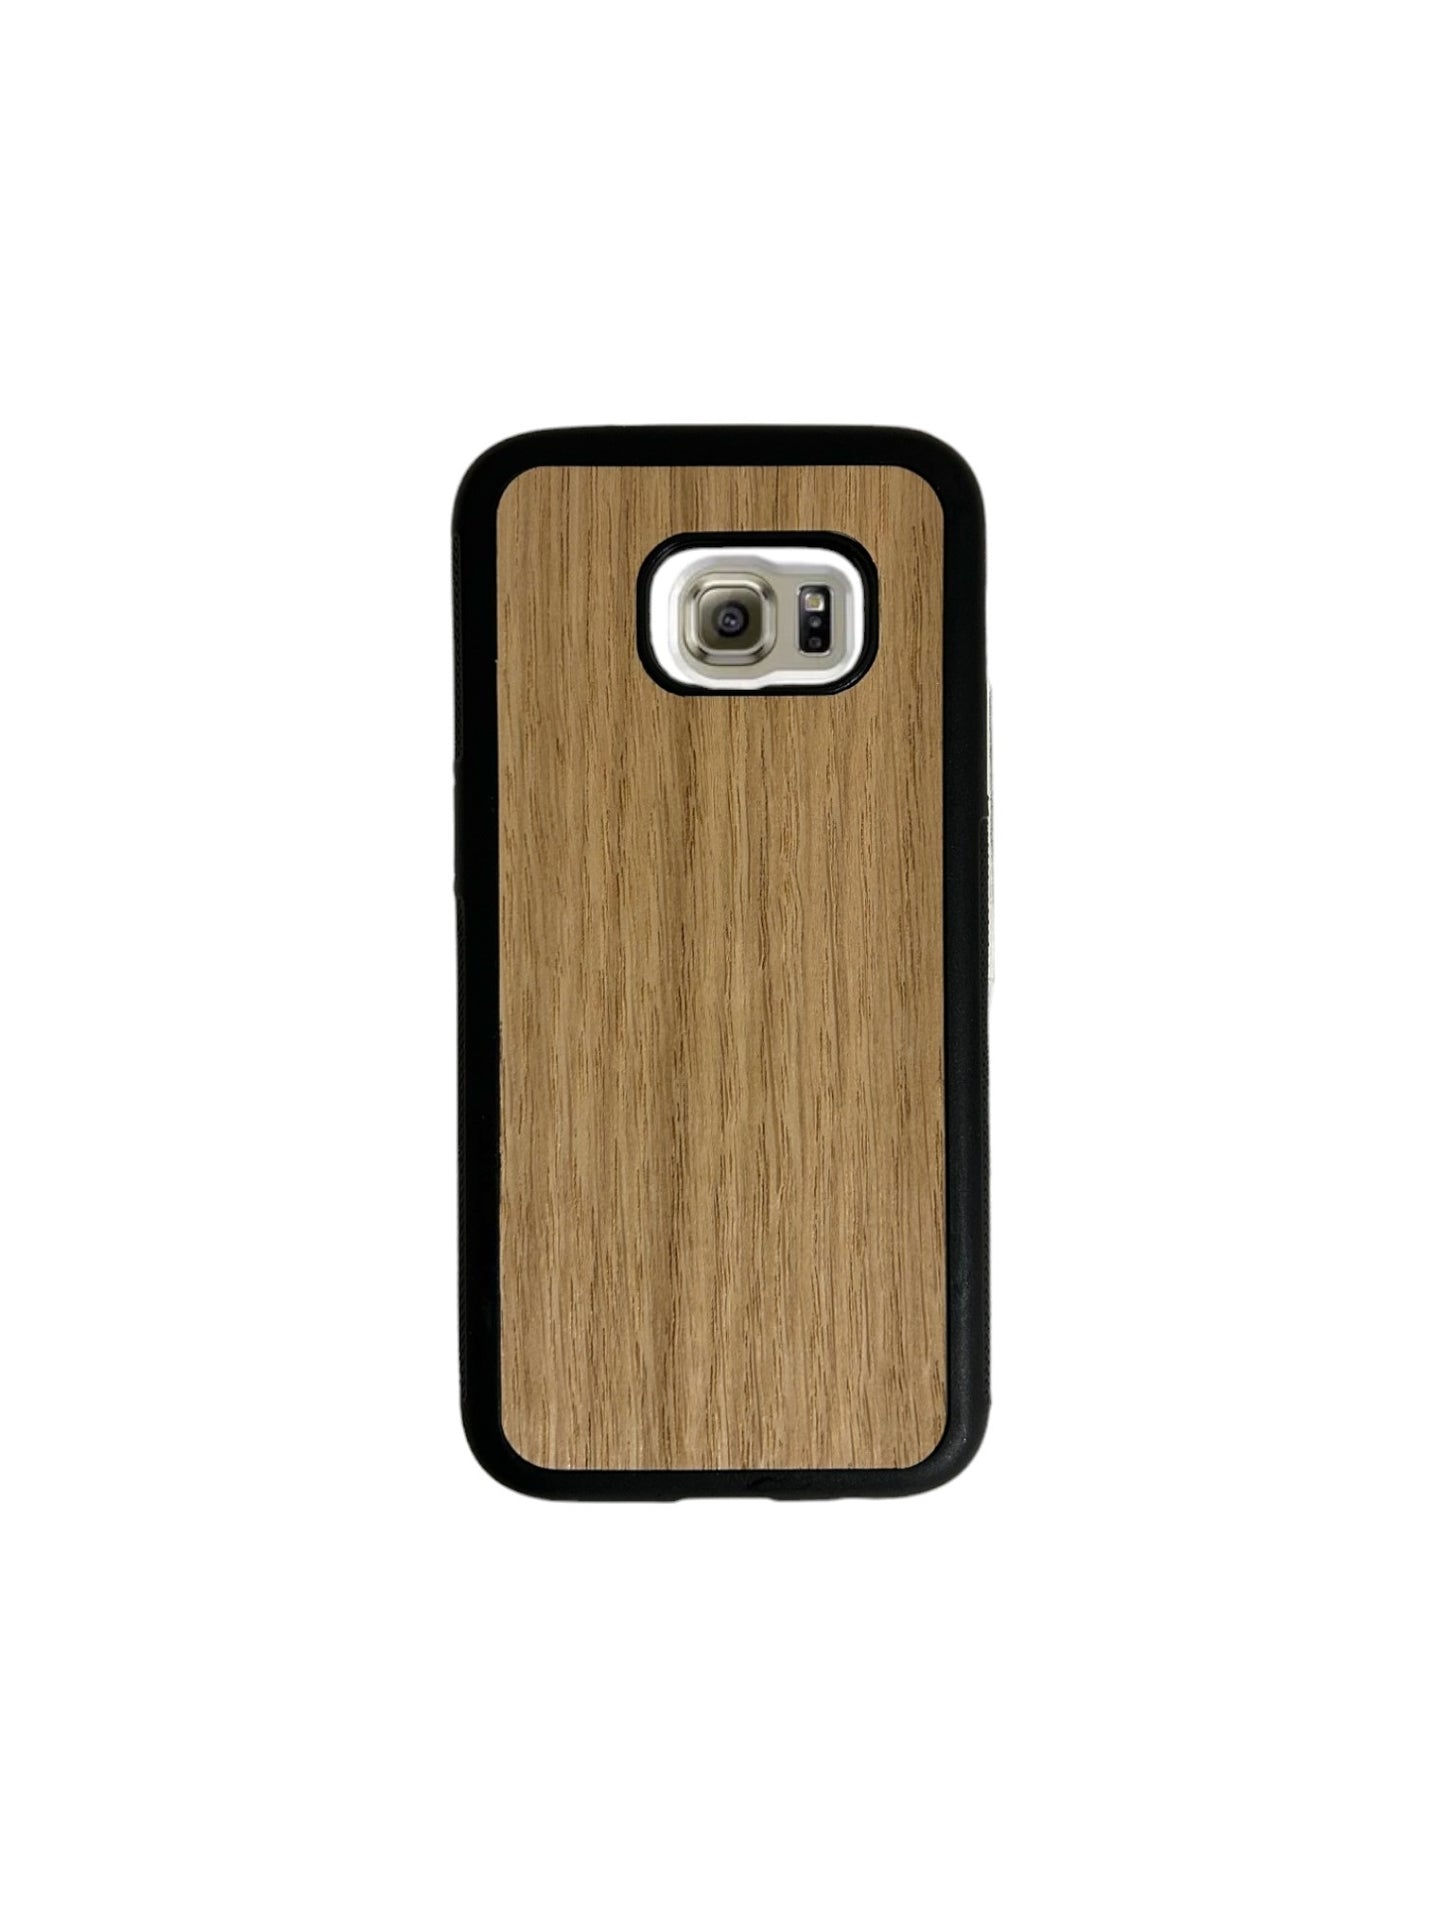 Samsung Galaxy S case - The simple